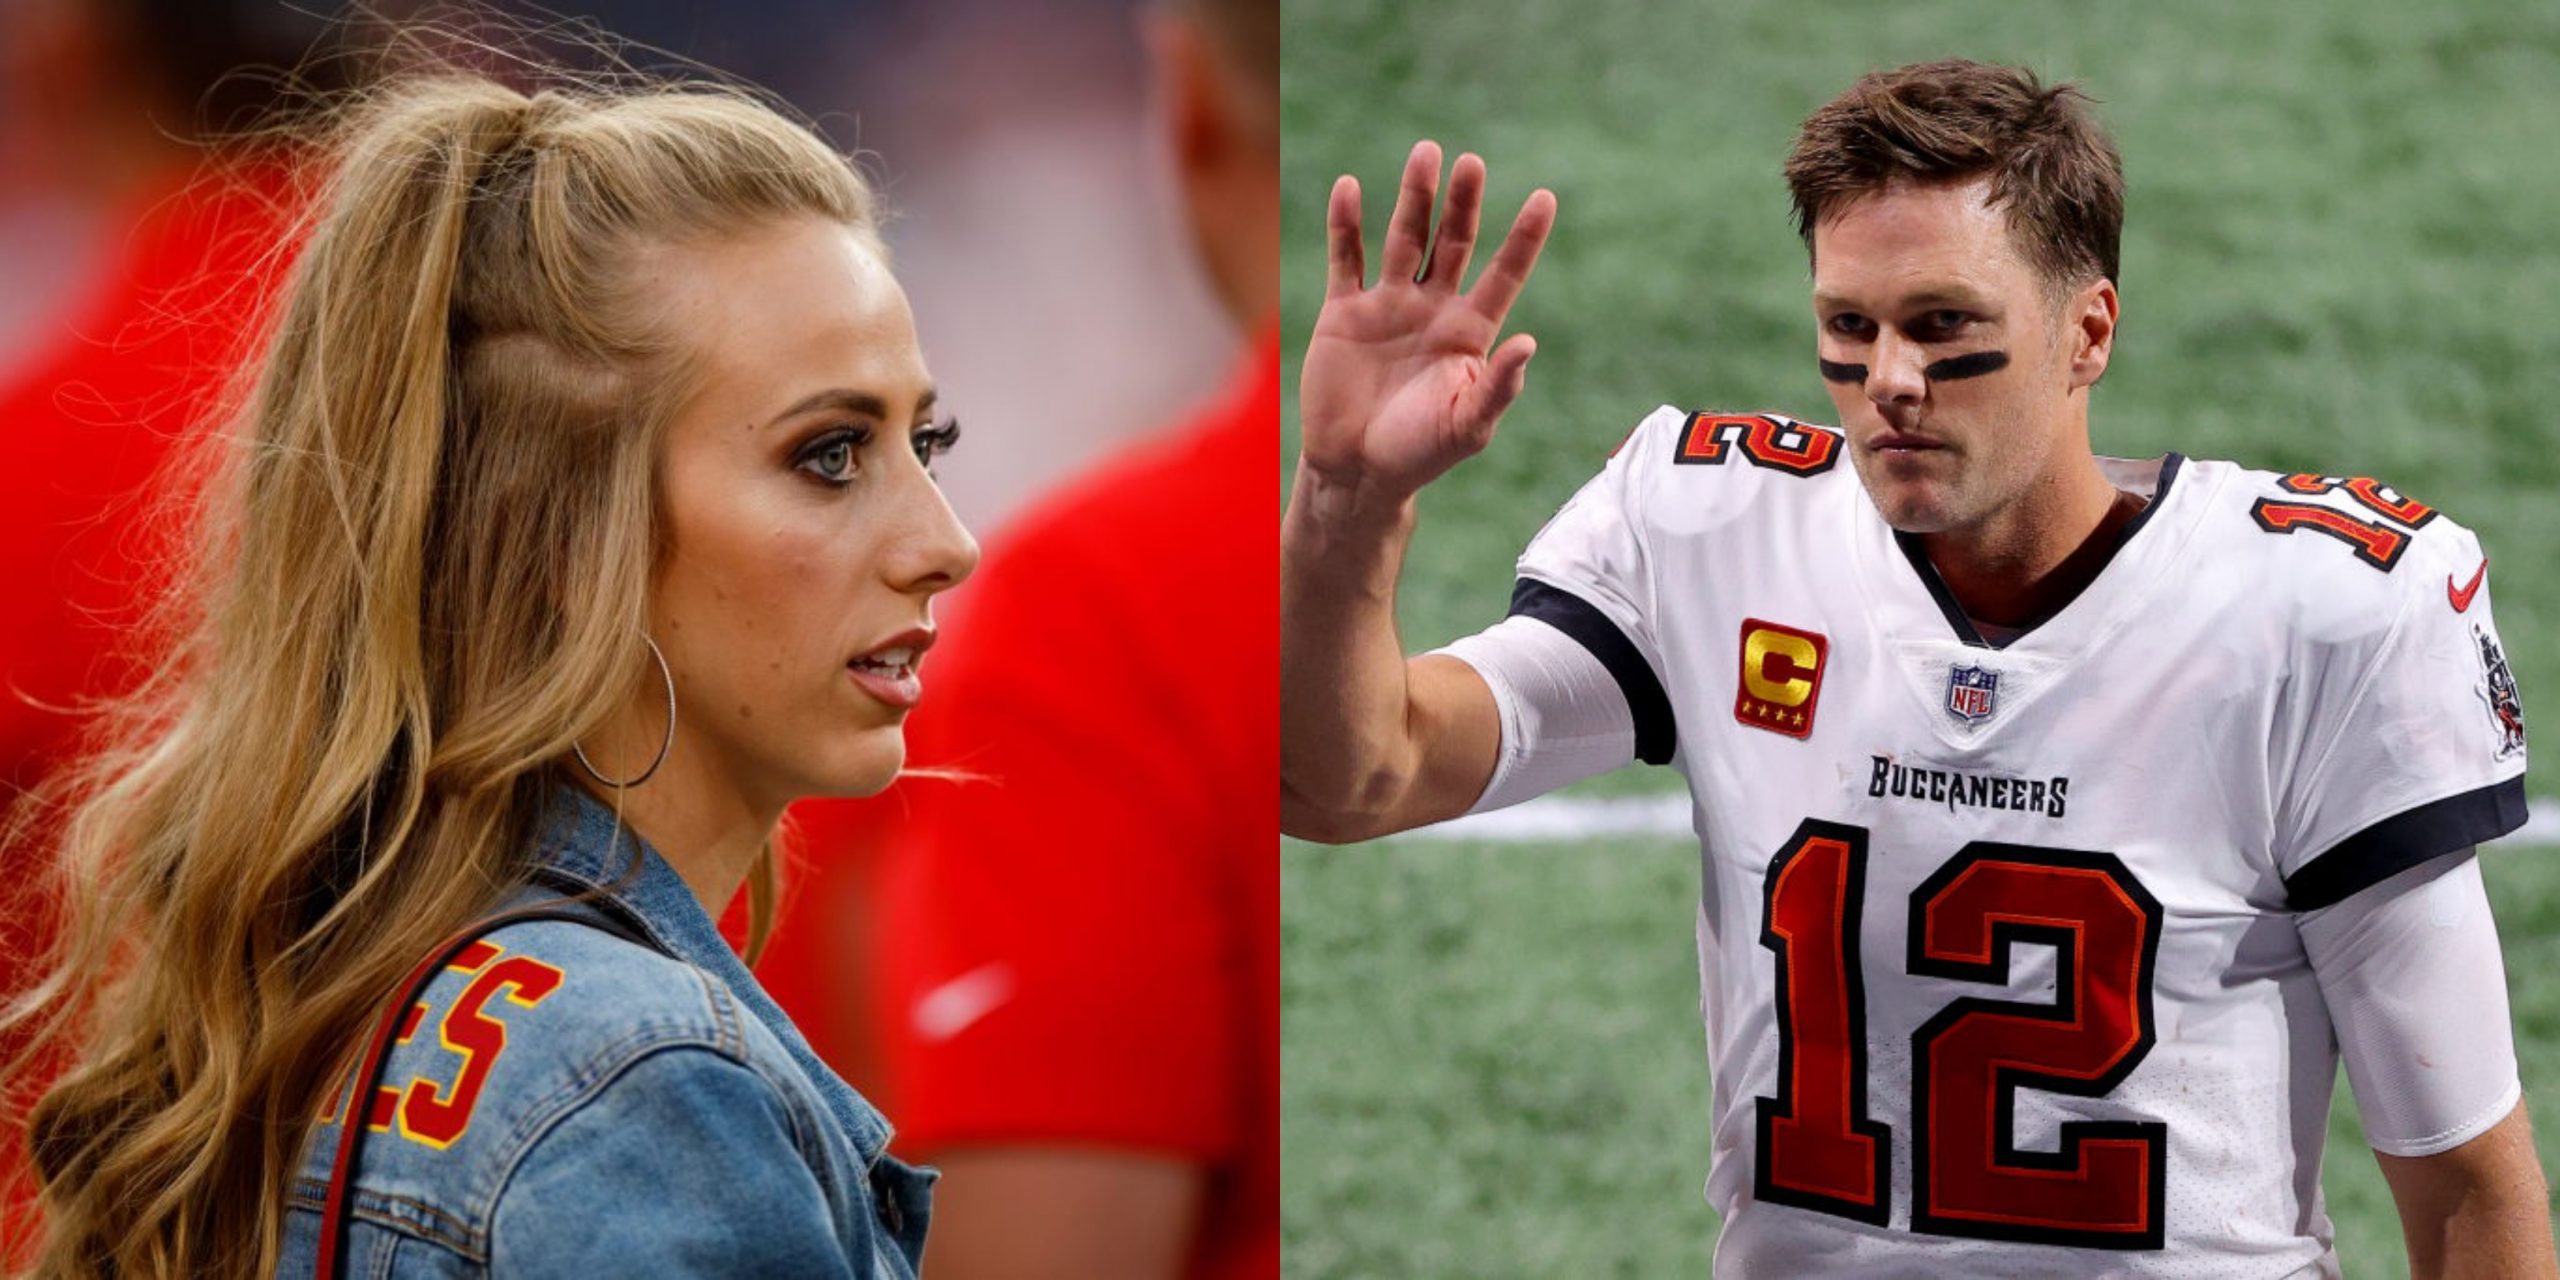 Patrick Mahomes’ fiancee is exposed as a Mega Tom Brady fan in old resurrected tweets (PIC)